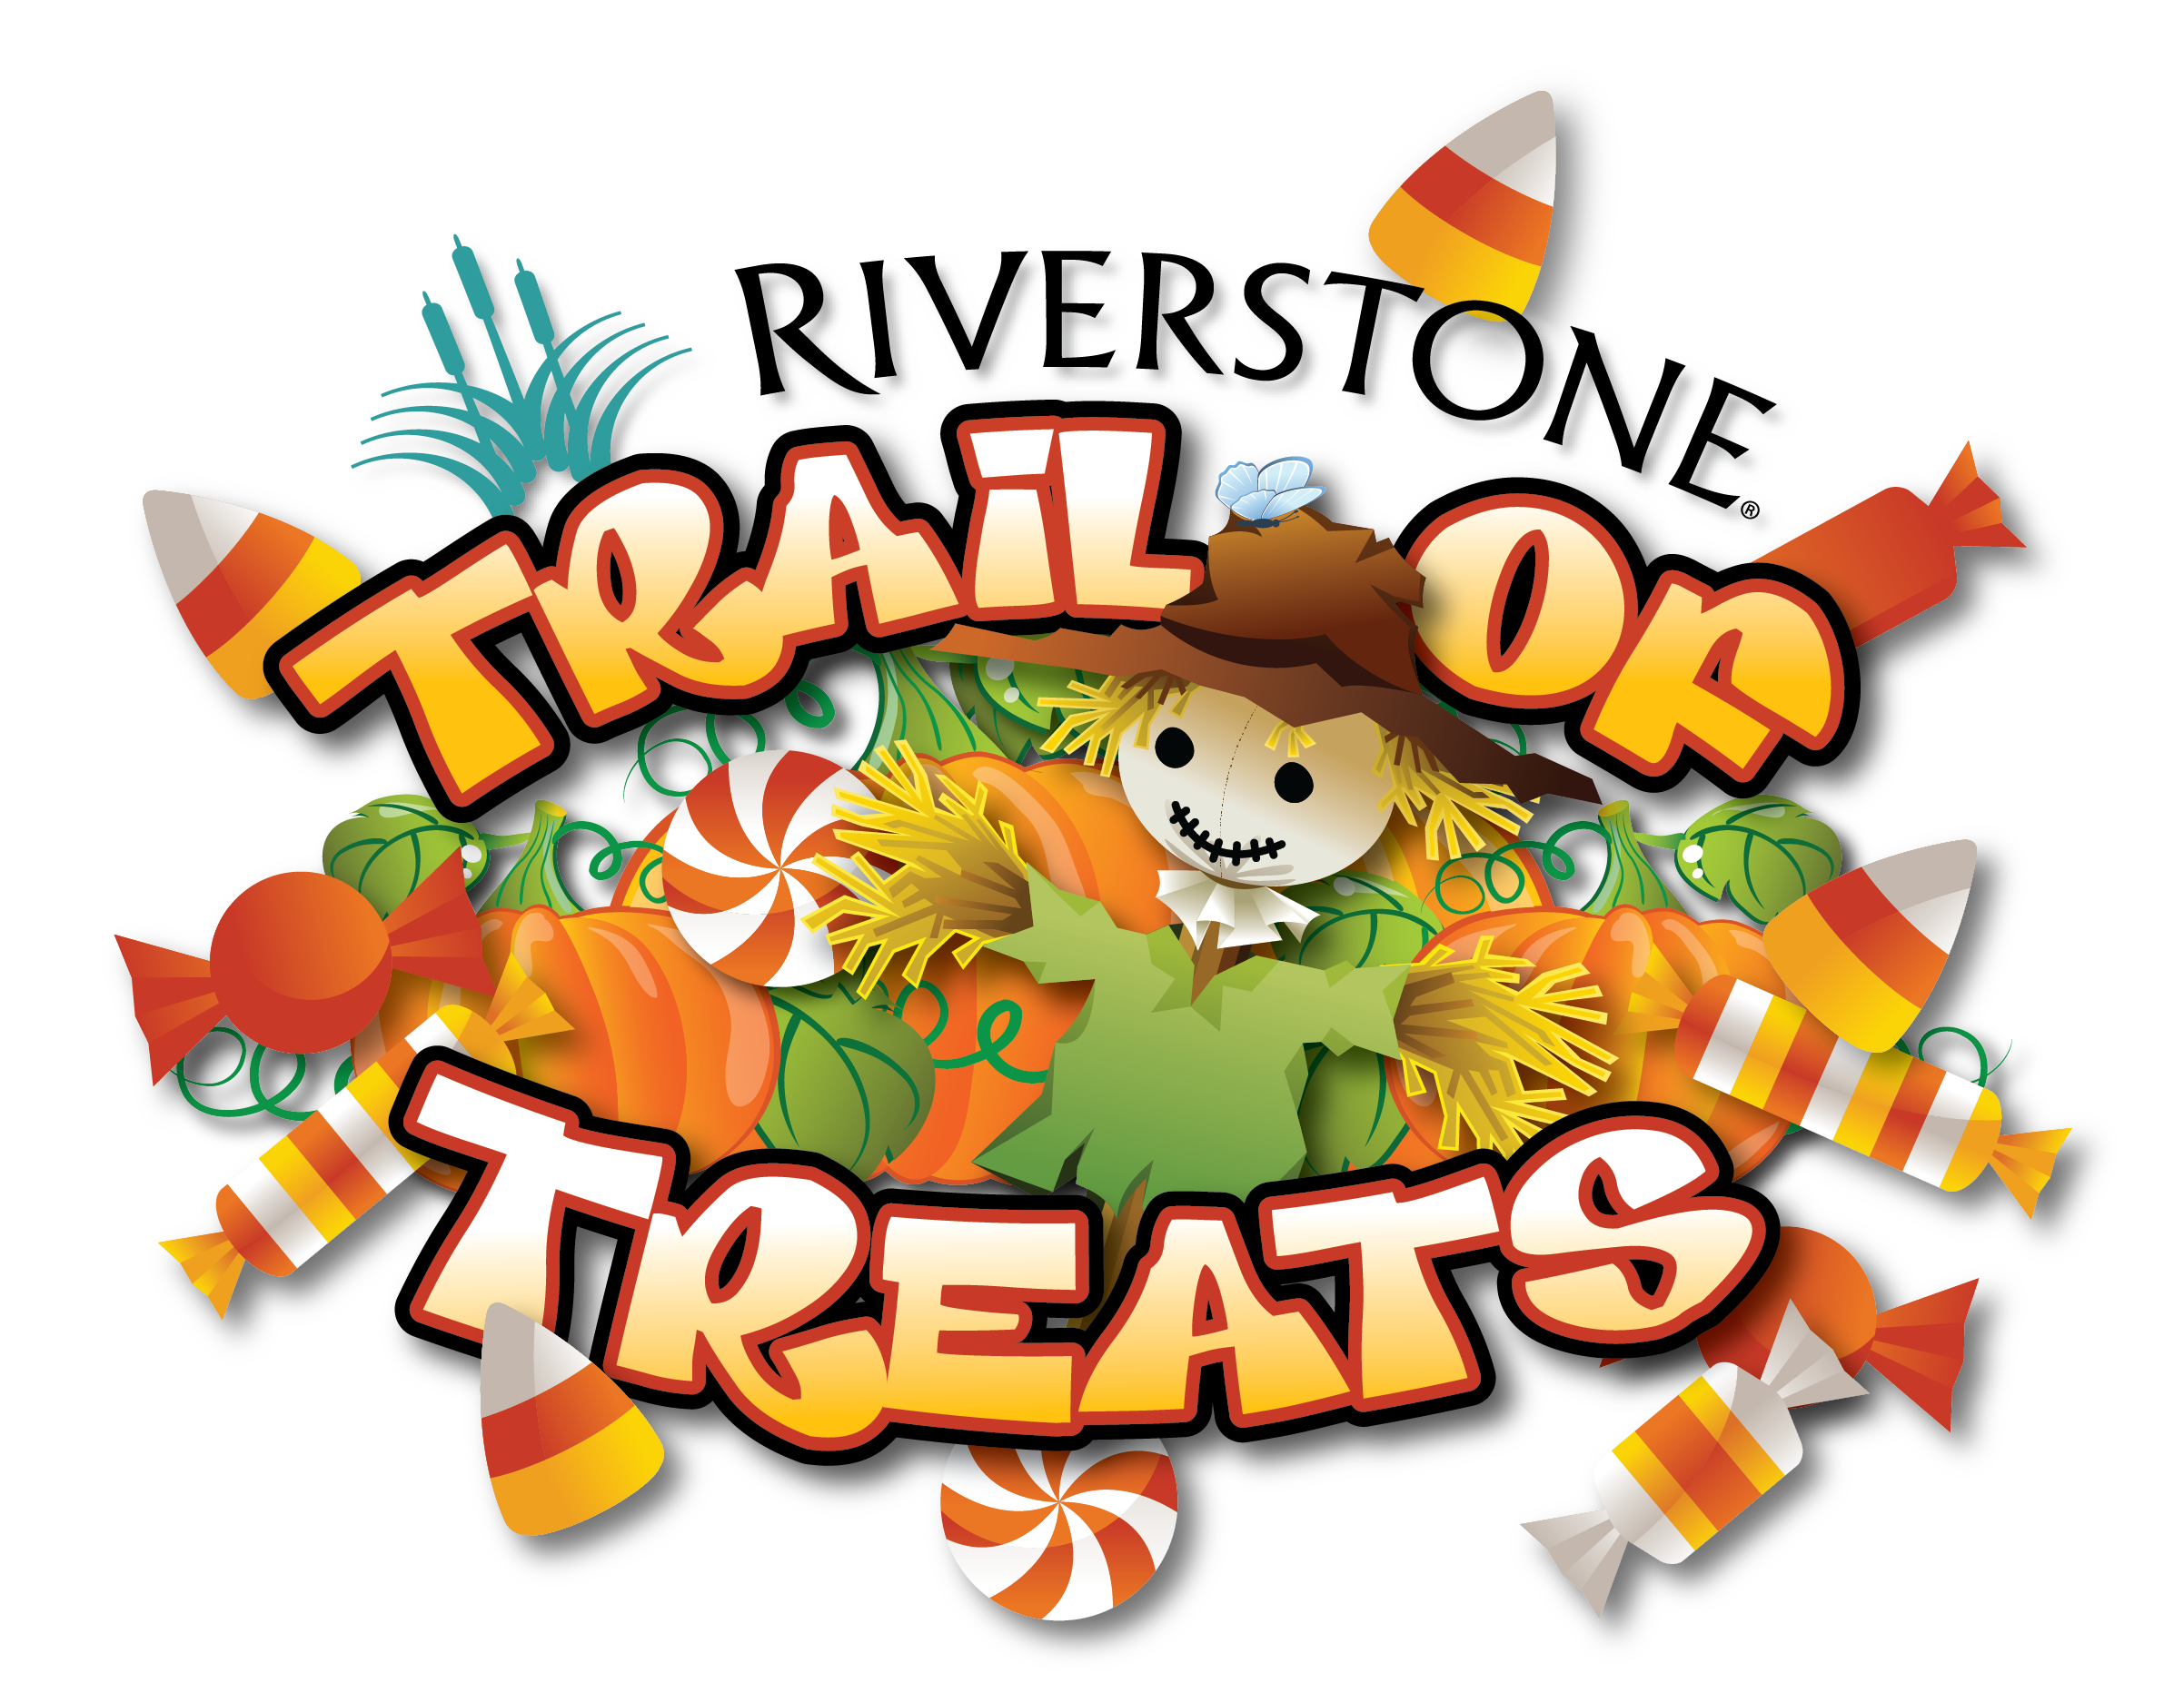 Trail of Treats October 31, 2020 Riverstone Events